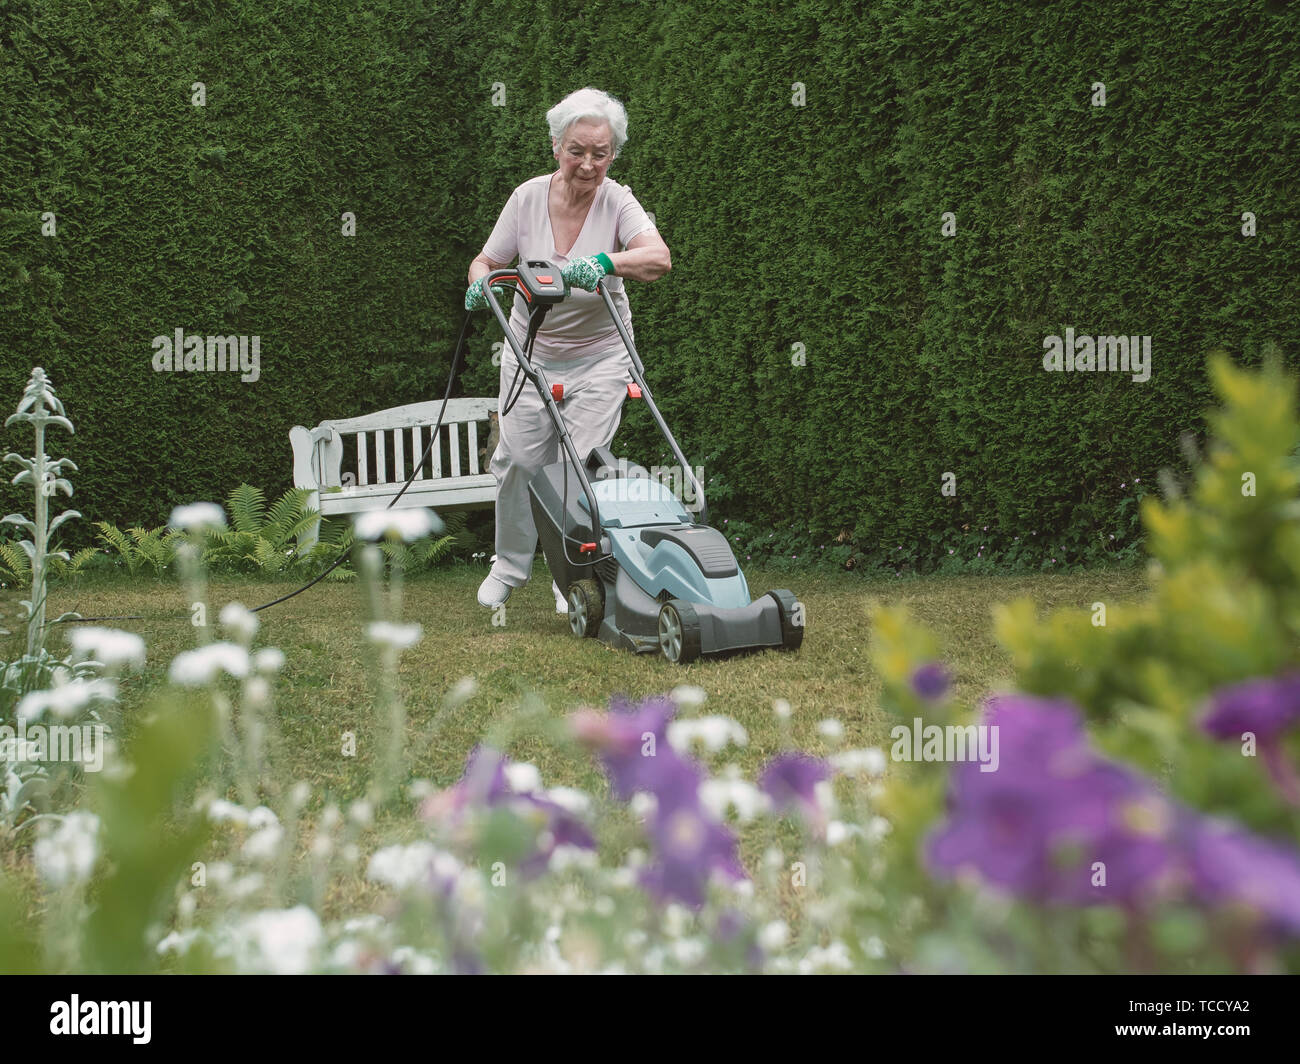 Senior woman working in the garden with mower Stock Photo